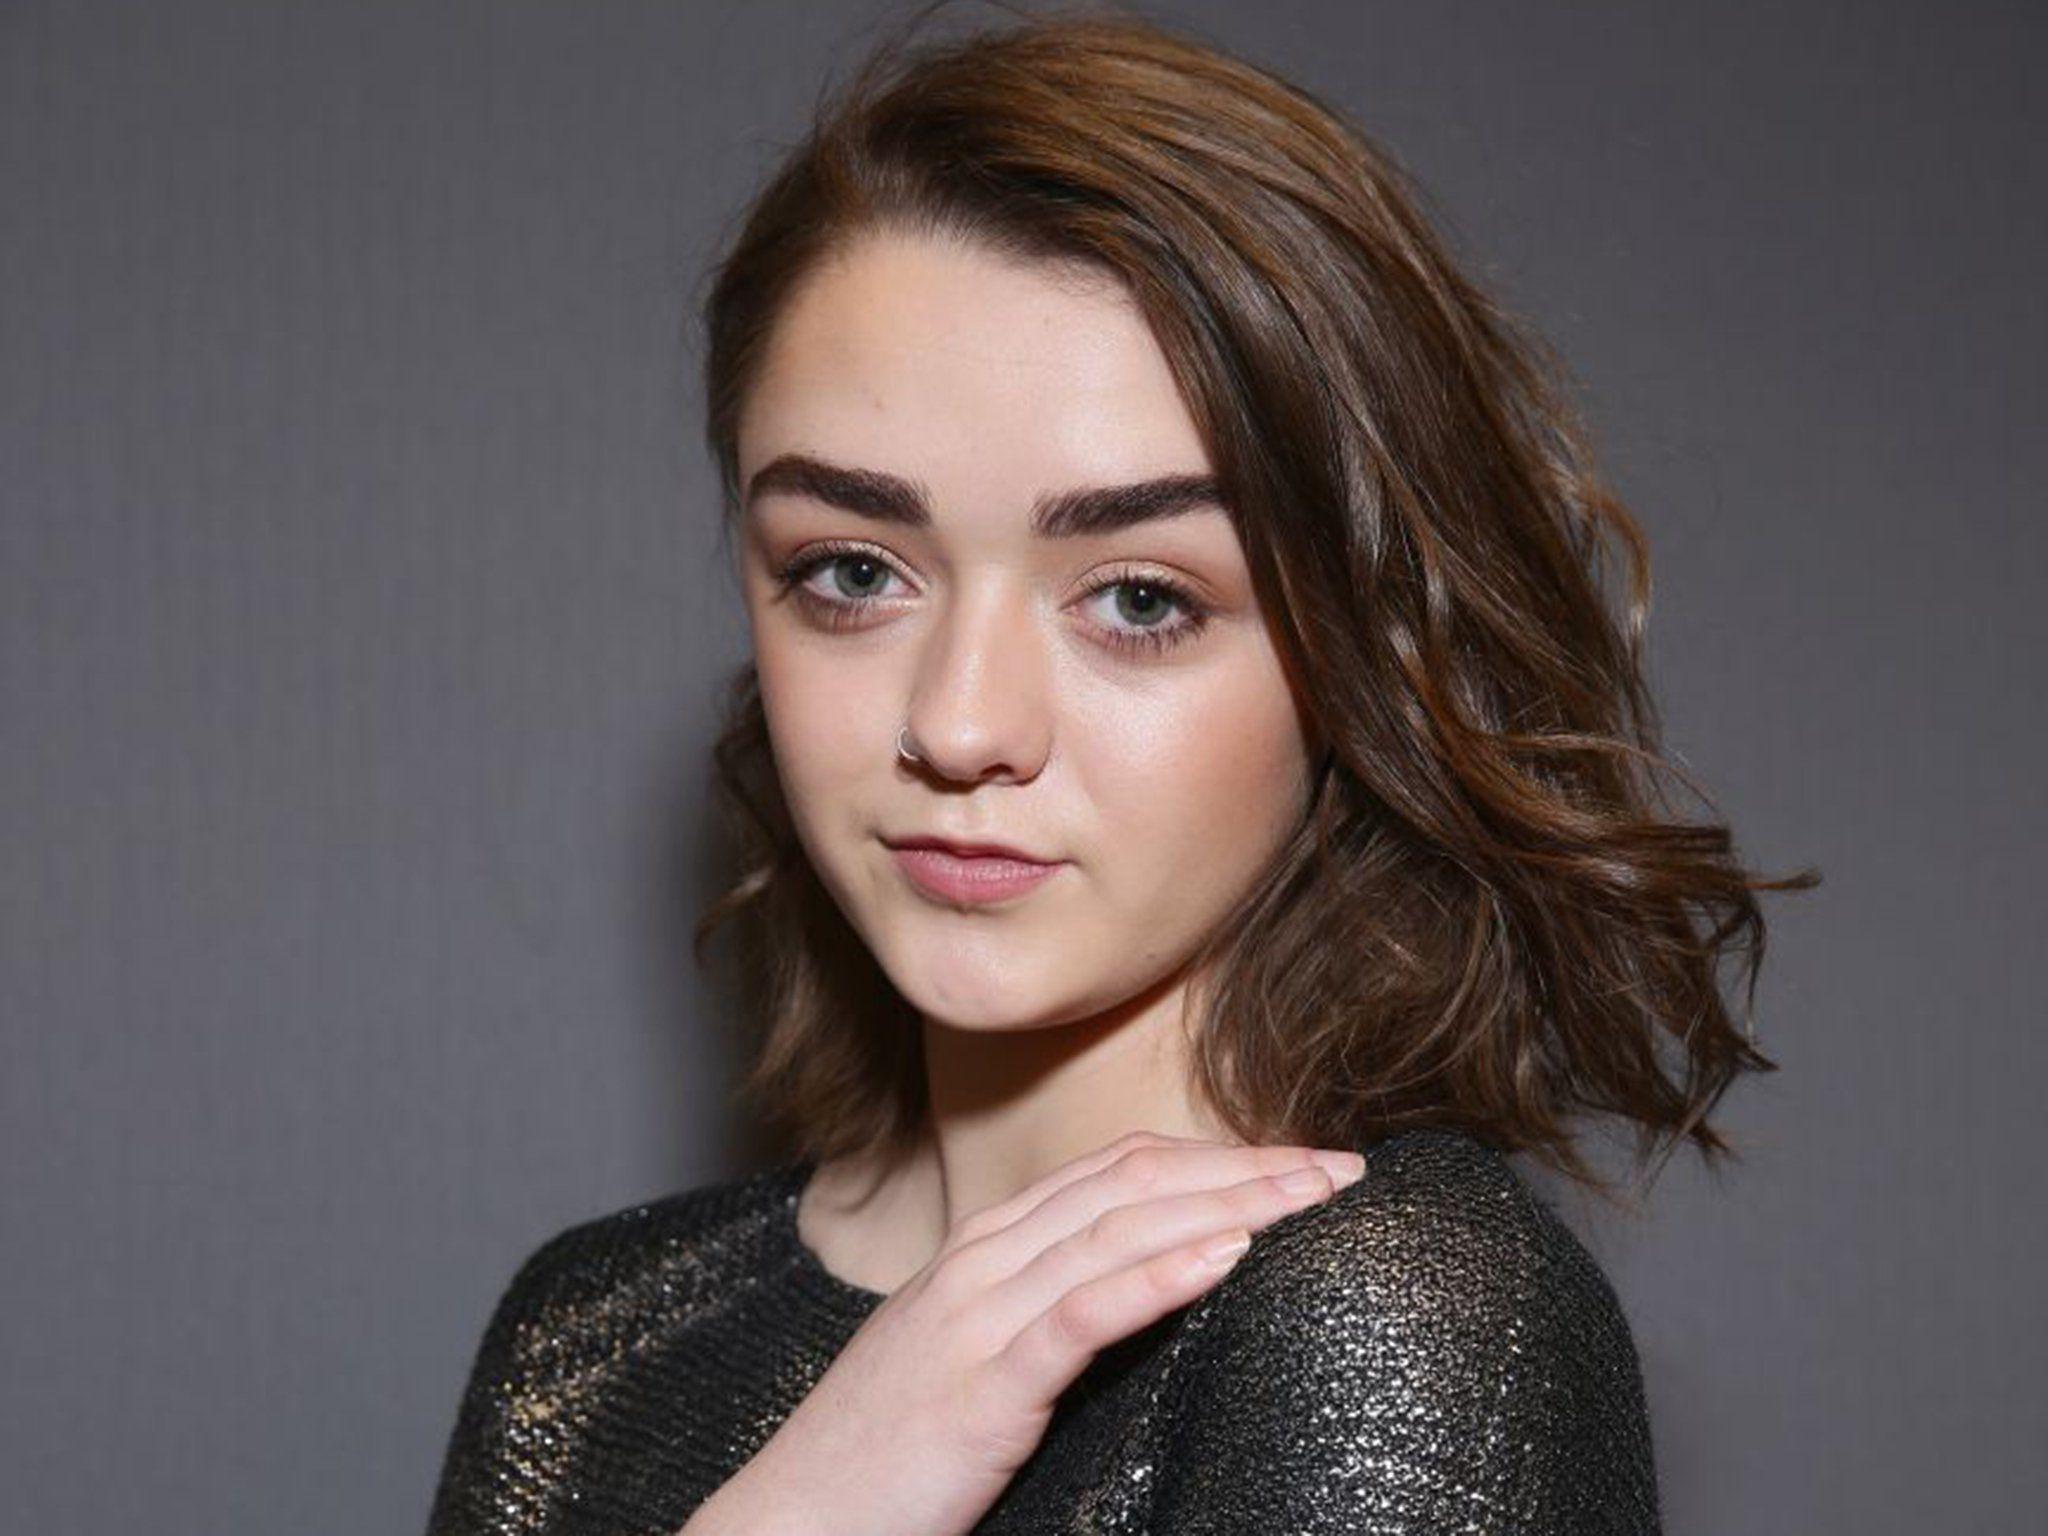 Game of Thrones actor Maisie Williams on her sexuality: 'I've never